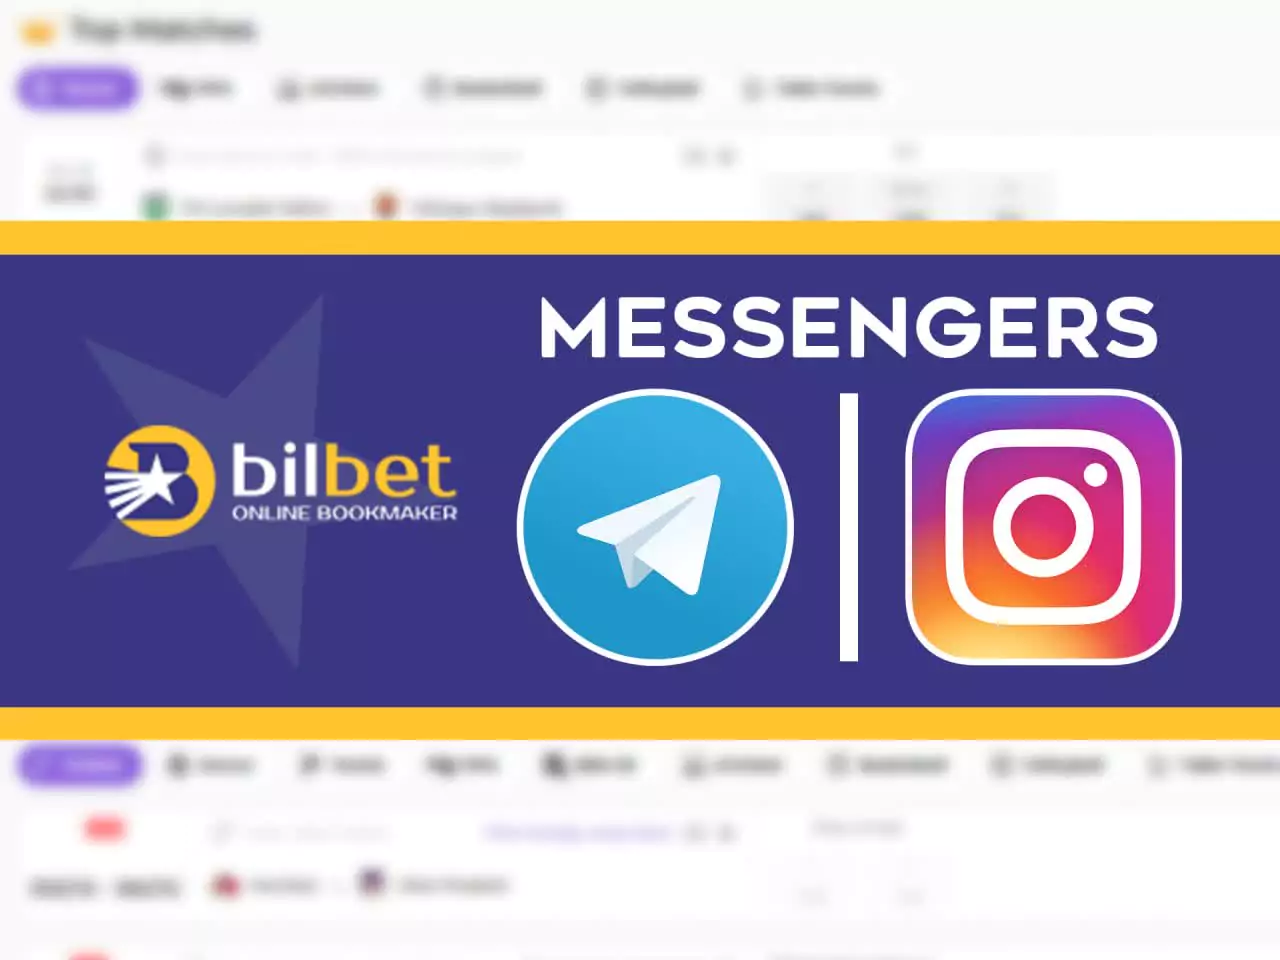 You can also reach the Bilbet team in the social media.